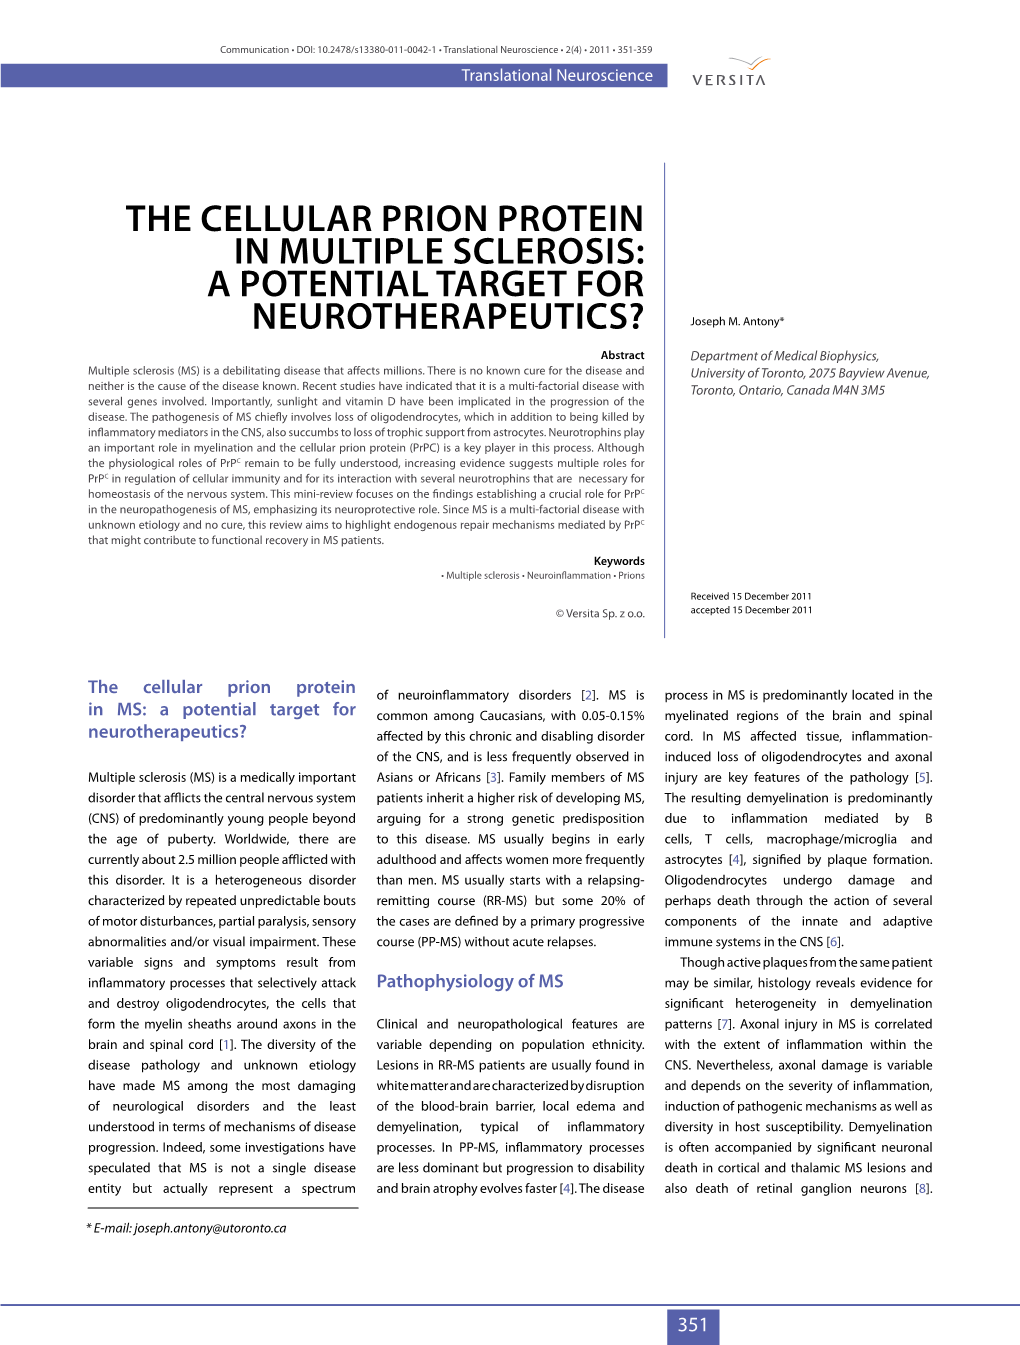 The Cellular Prion Protein in Multiple Sclerosis: a Potential Target for Neurotherapeutics? Joseph M